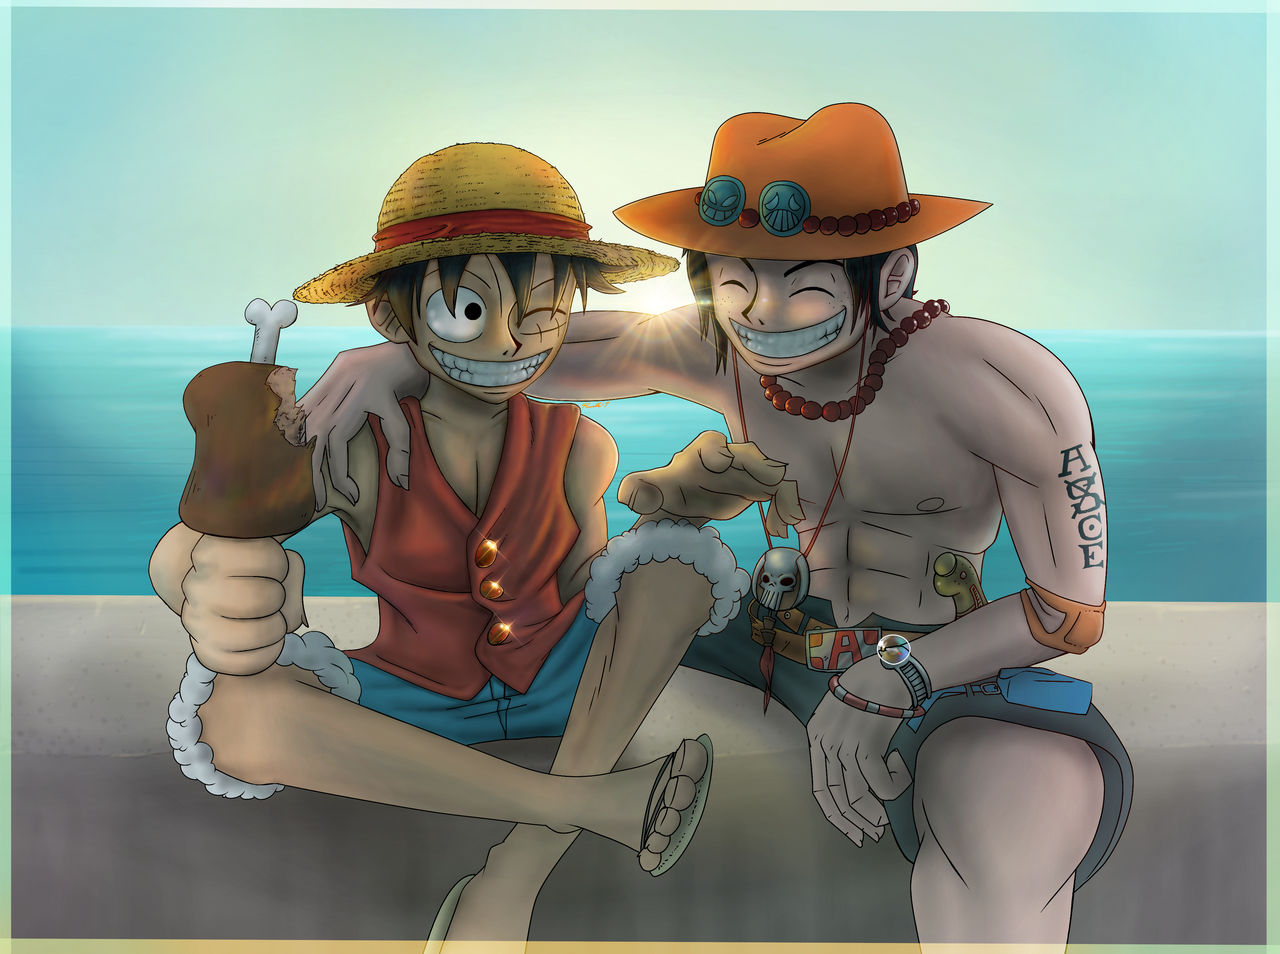 The Going Merry [One Piece] by Humble-T on DeviantArt